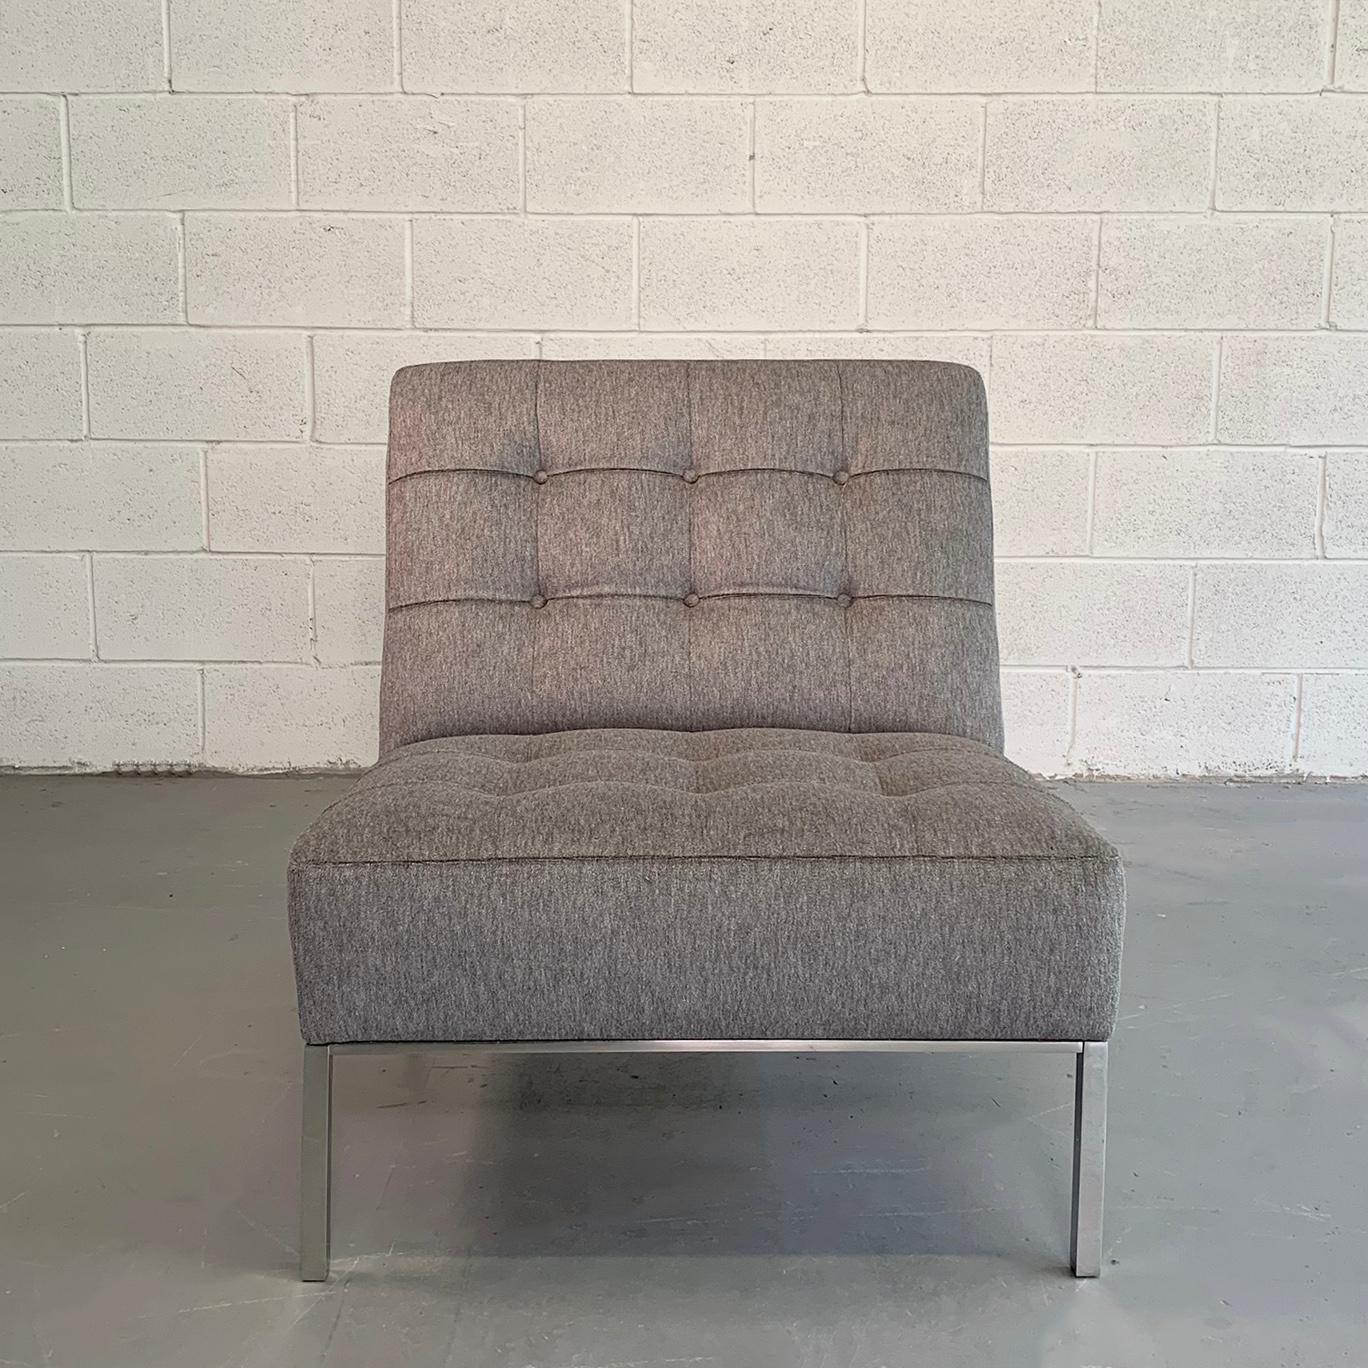 20th Century Mid-Century Modern Upholstered Slipper Chair by Florence Knoll